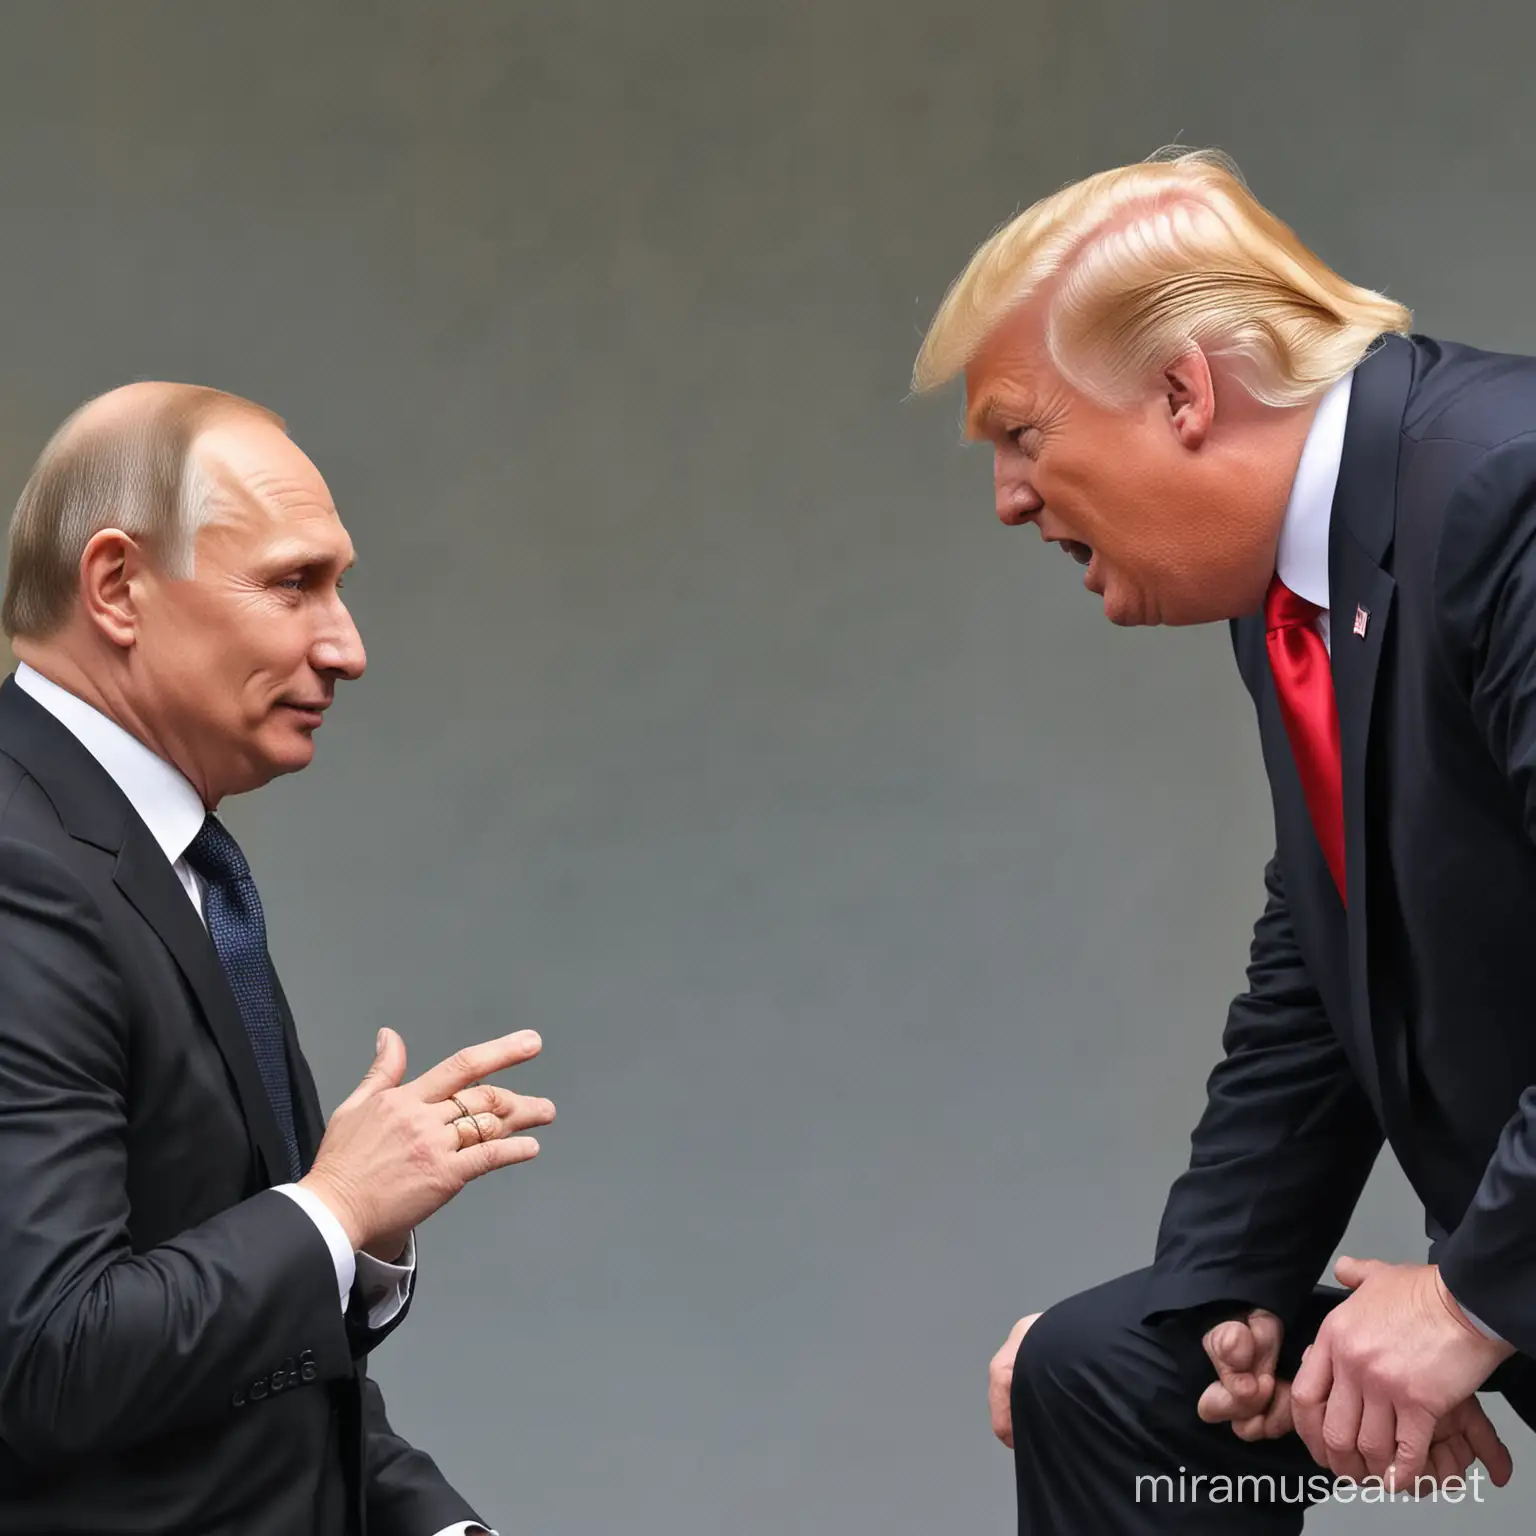 Putin is puppeteering trump from above. 